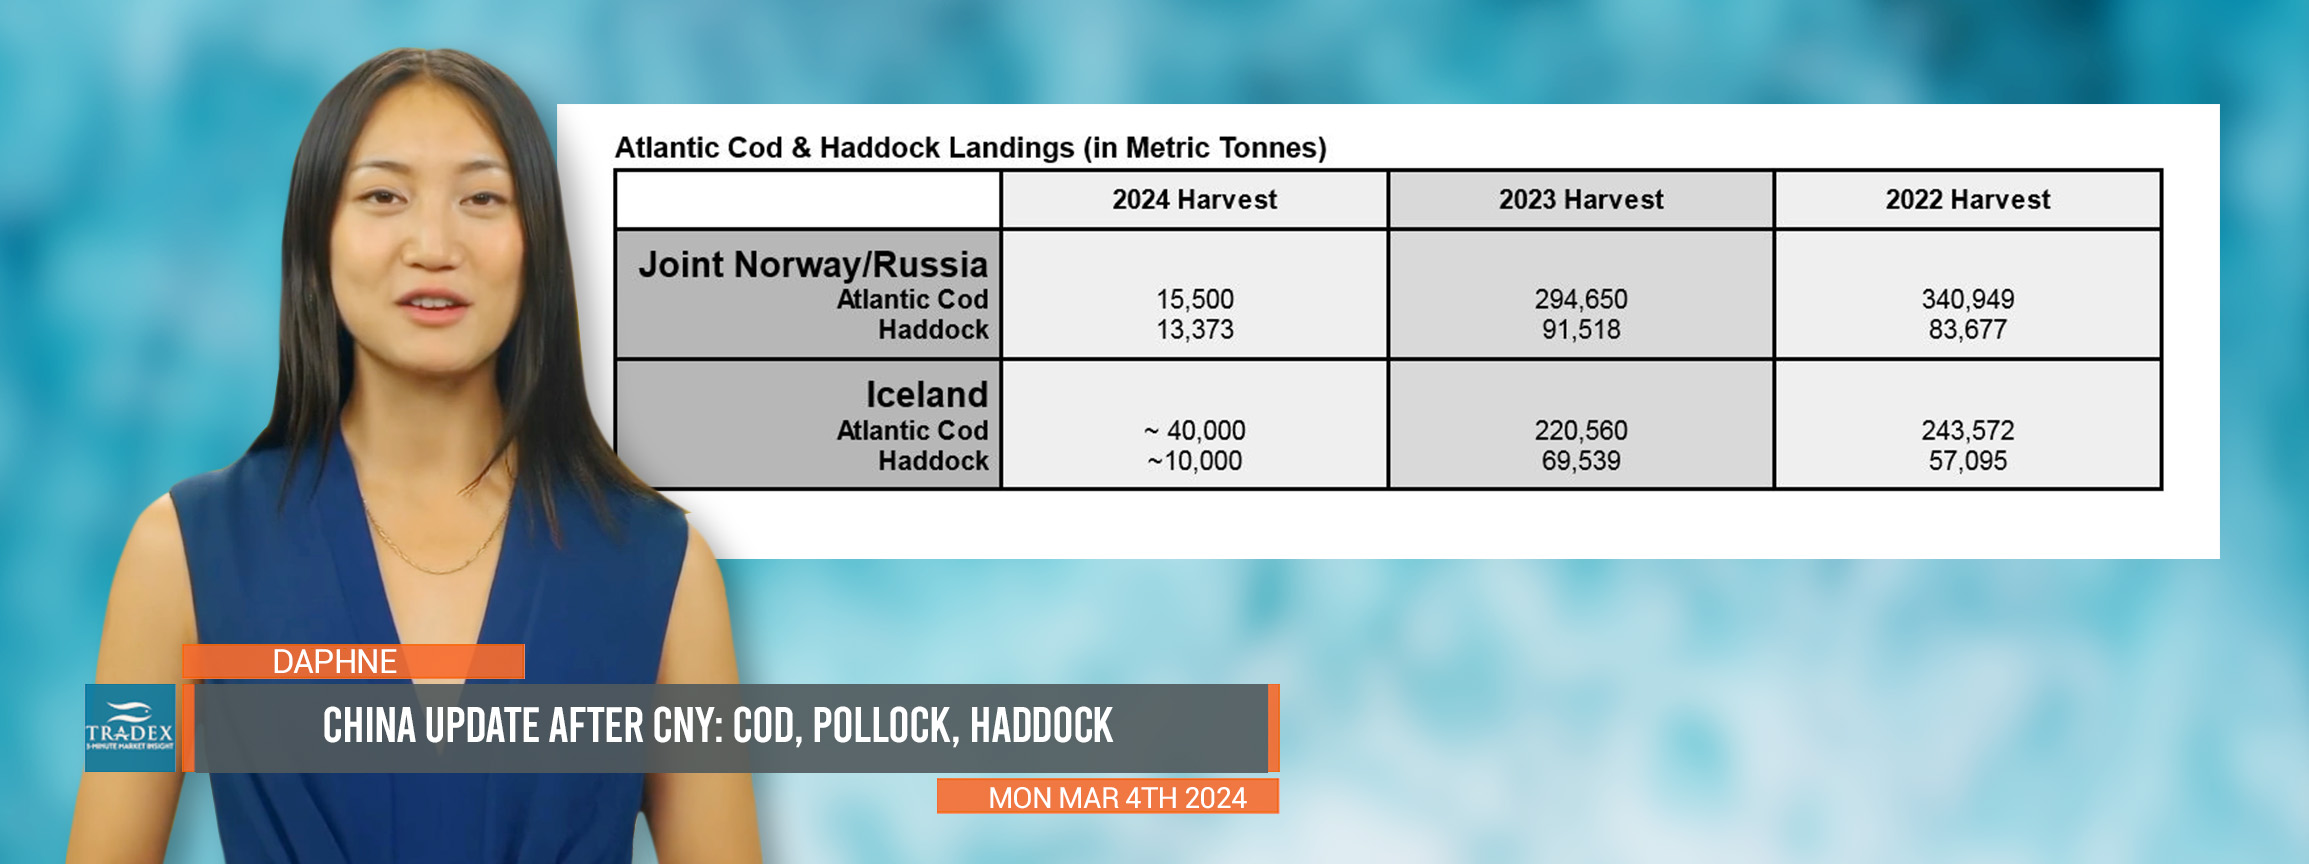 Post-CNY: China Update for Atlantic Cod, Pollock, and Haddock